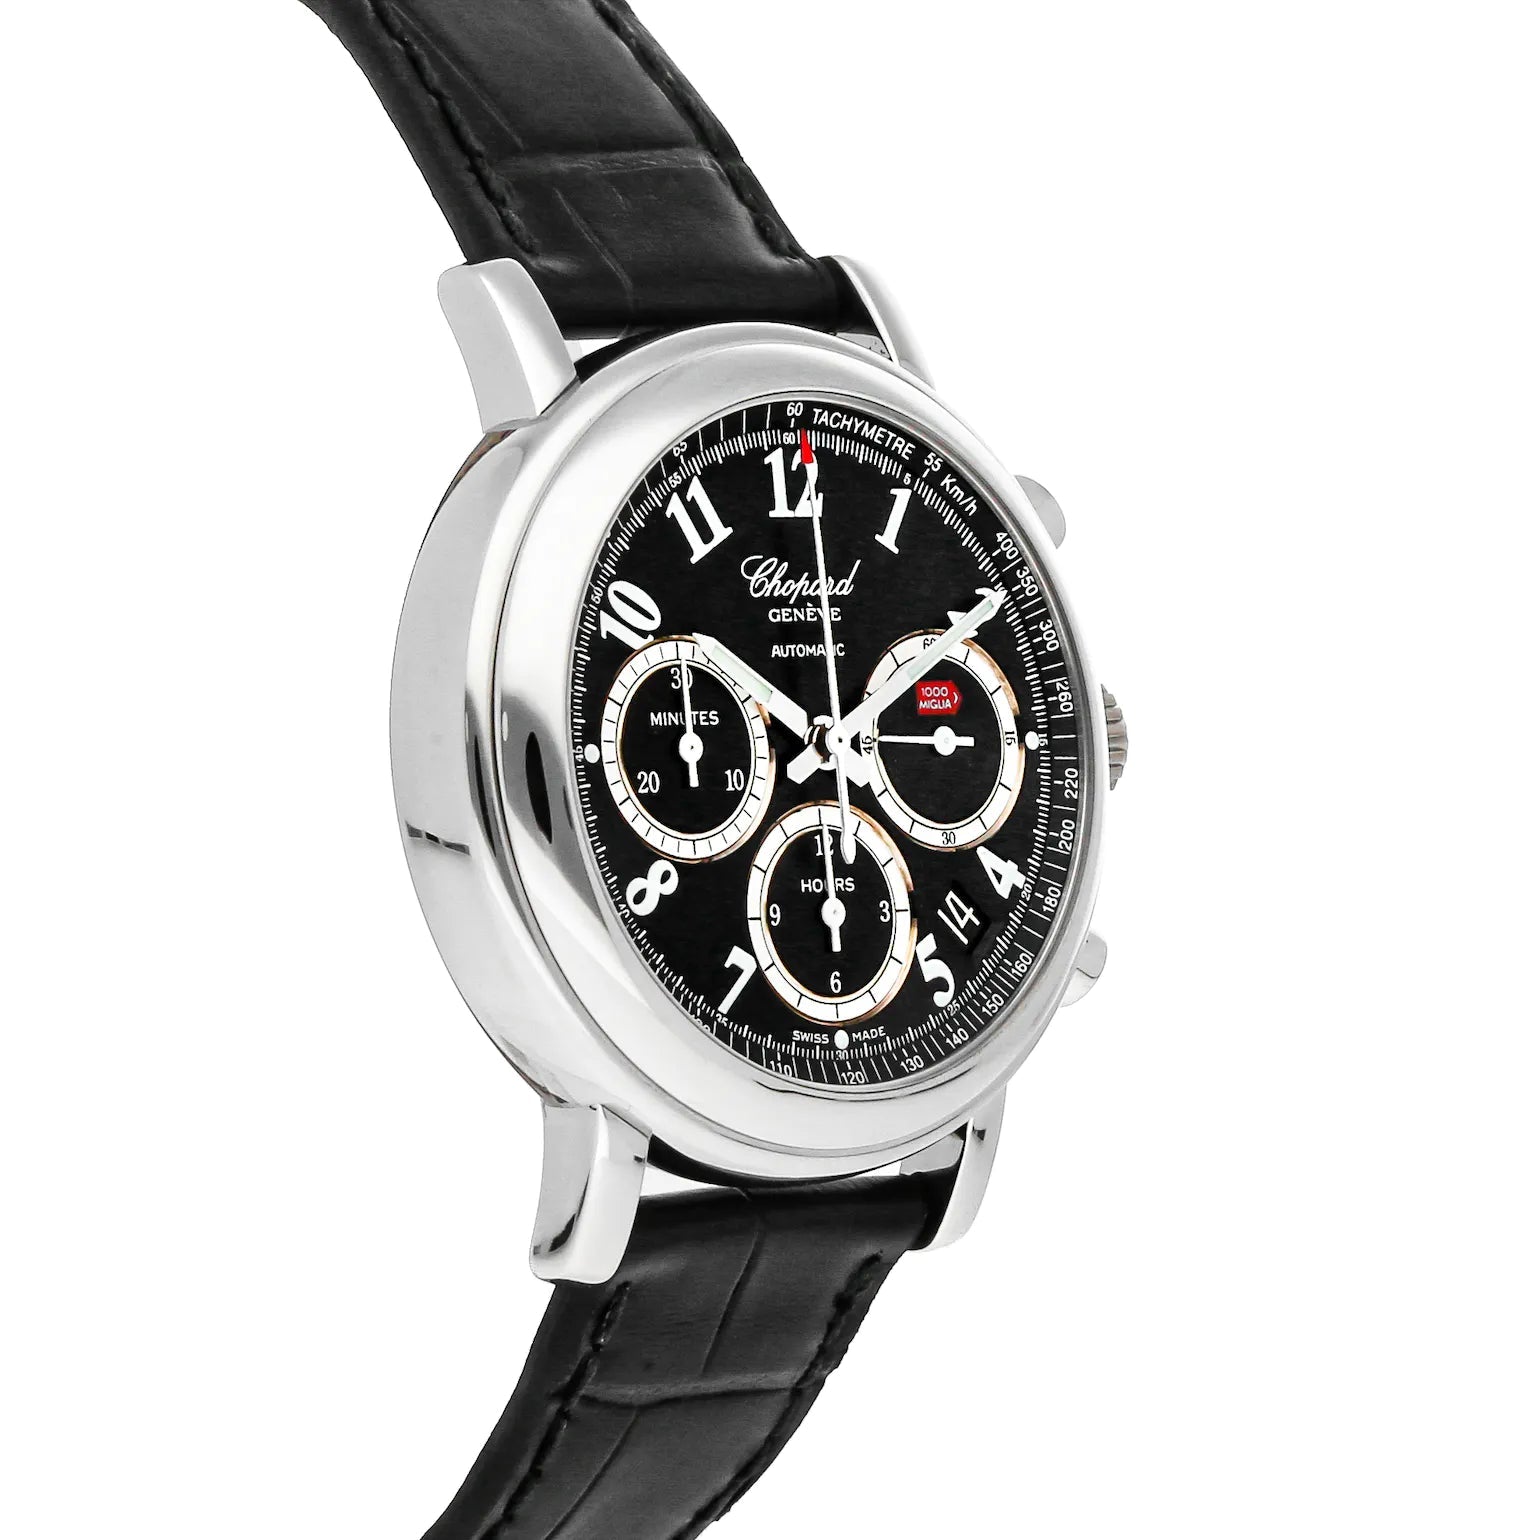 CHOPARD  MILLE MIGLIA, REFERENCE 8331, A LIMITED EDITION